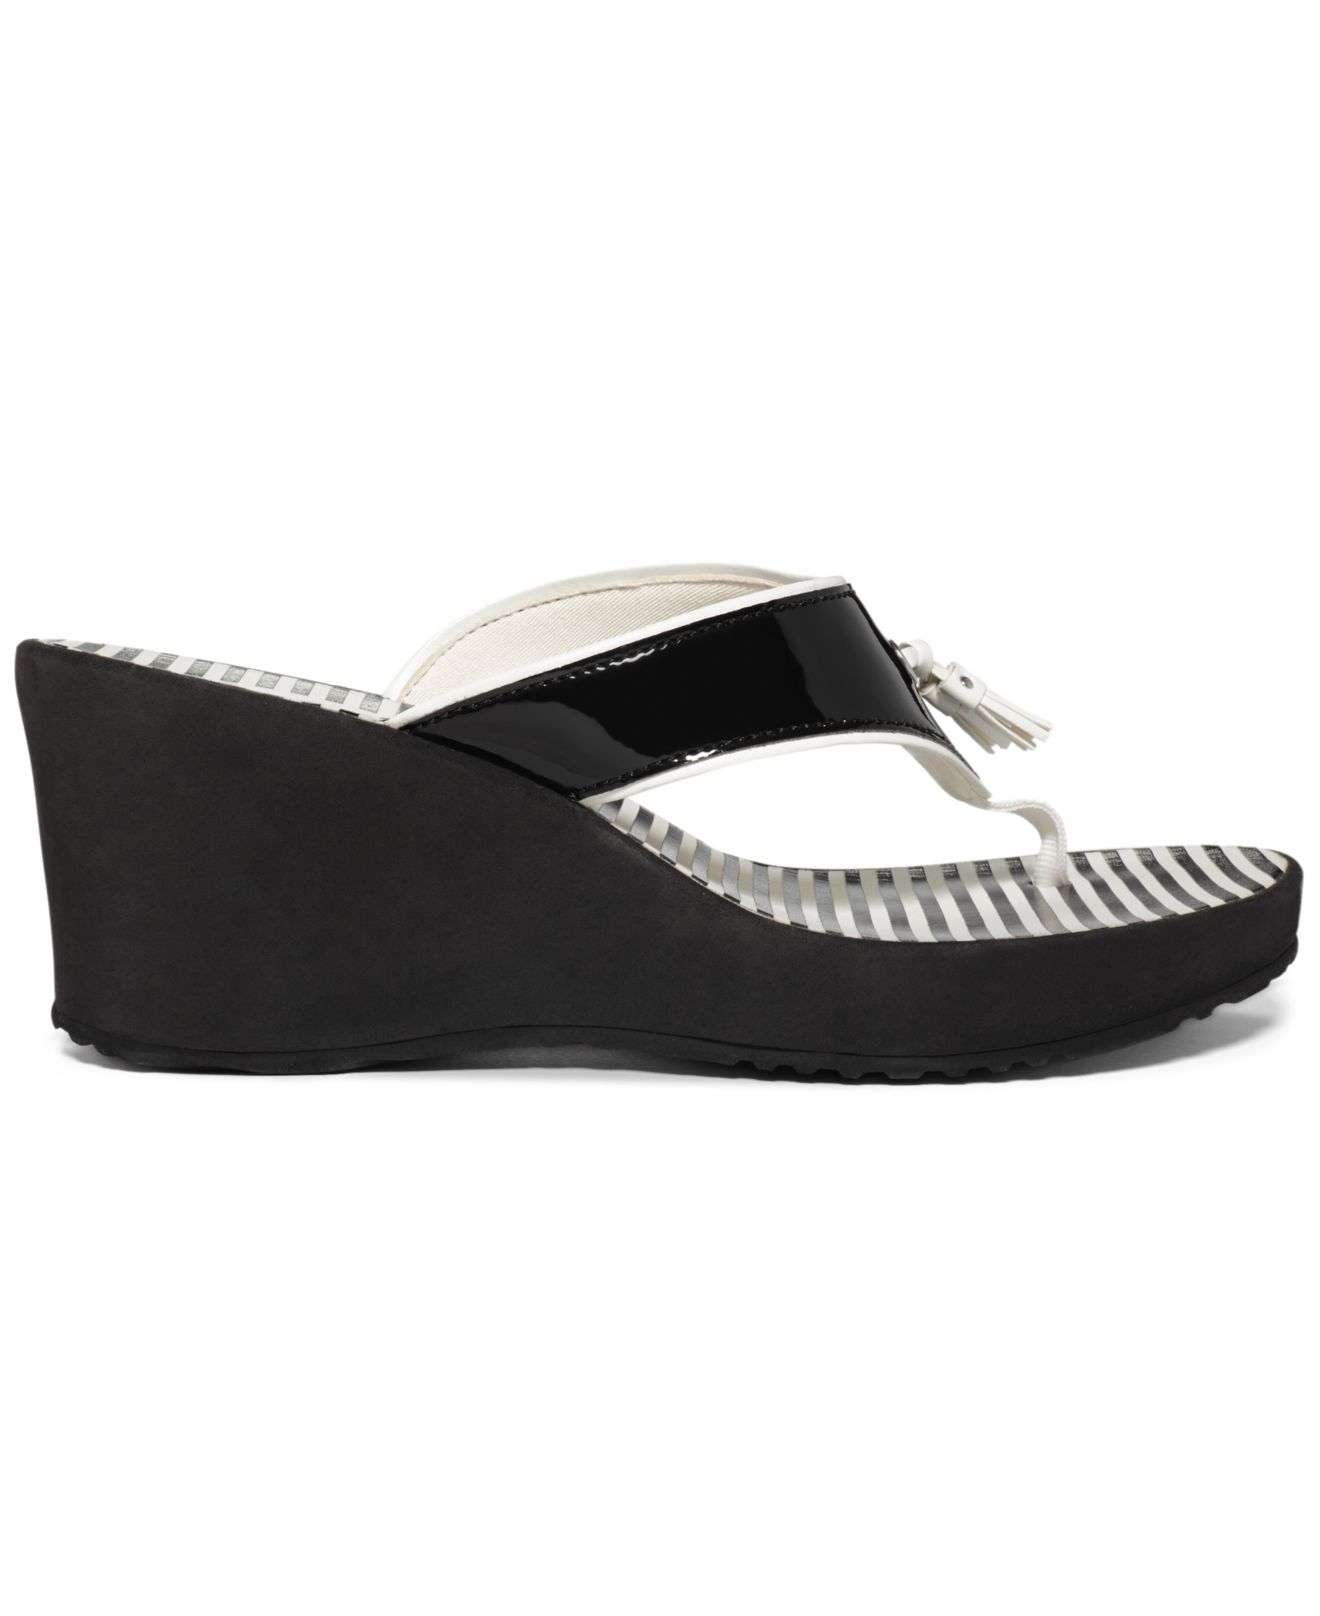 Clarks Collection Women'S Yacht Flash Wedge Sandals in Black | Lyst